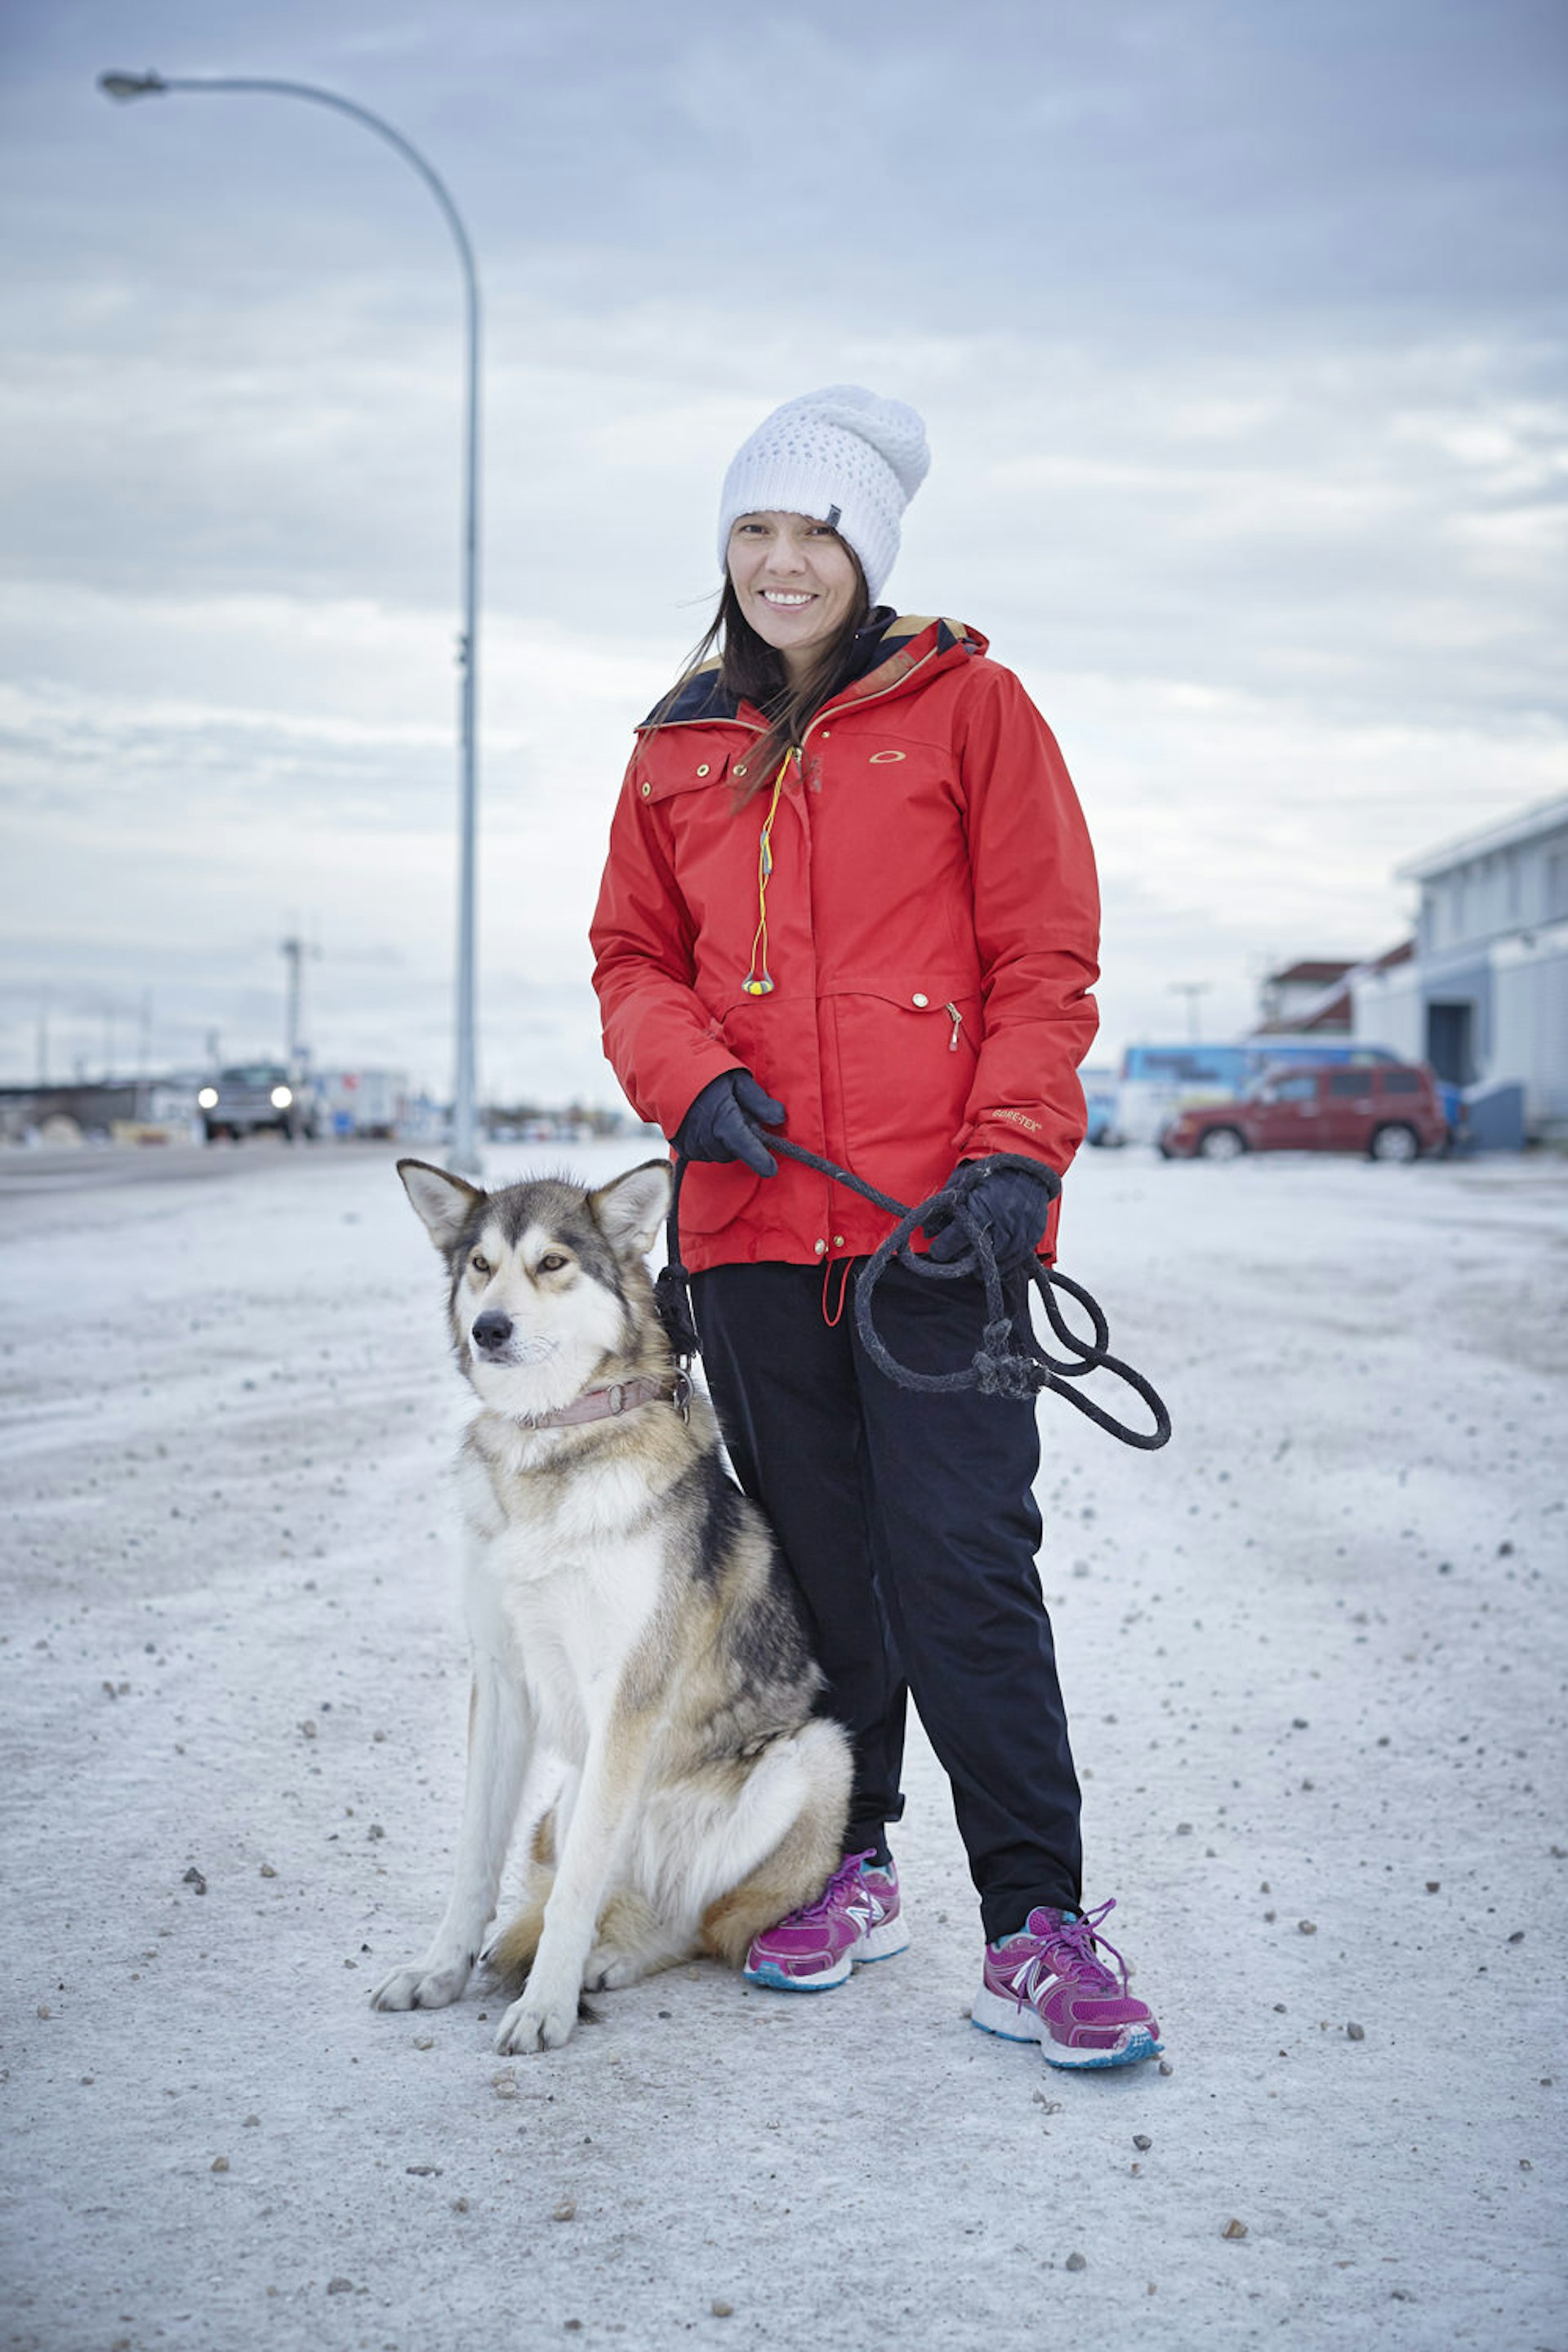 Polar bears had great cultural significance to Vonda McPherson's Cree ancestors © Jonathan Gregson / Lonely Planet